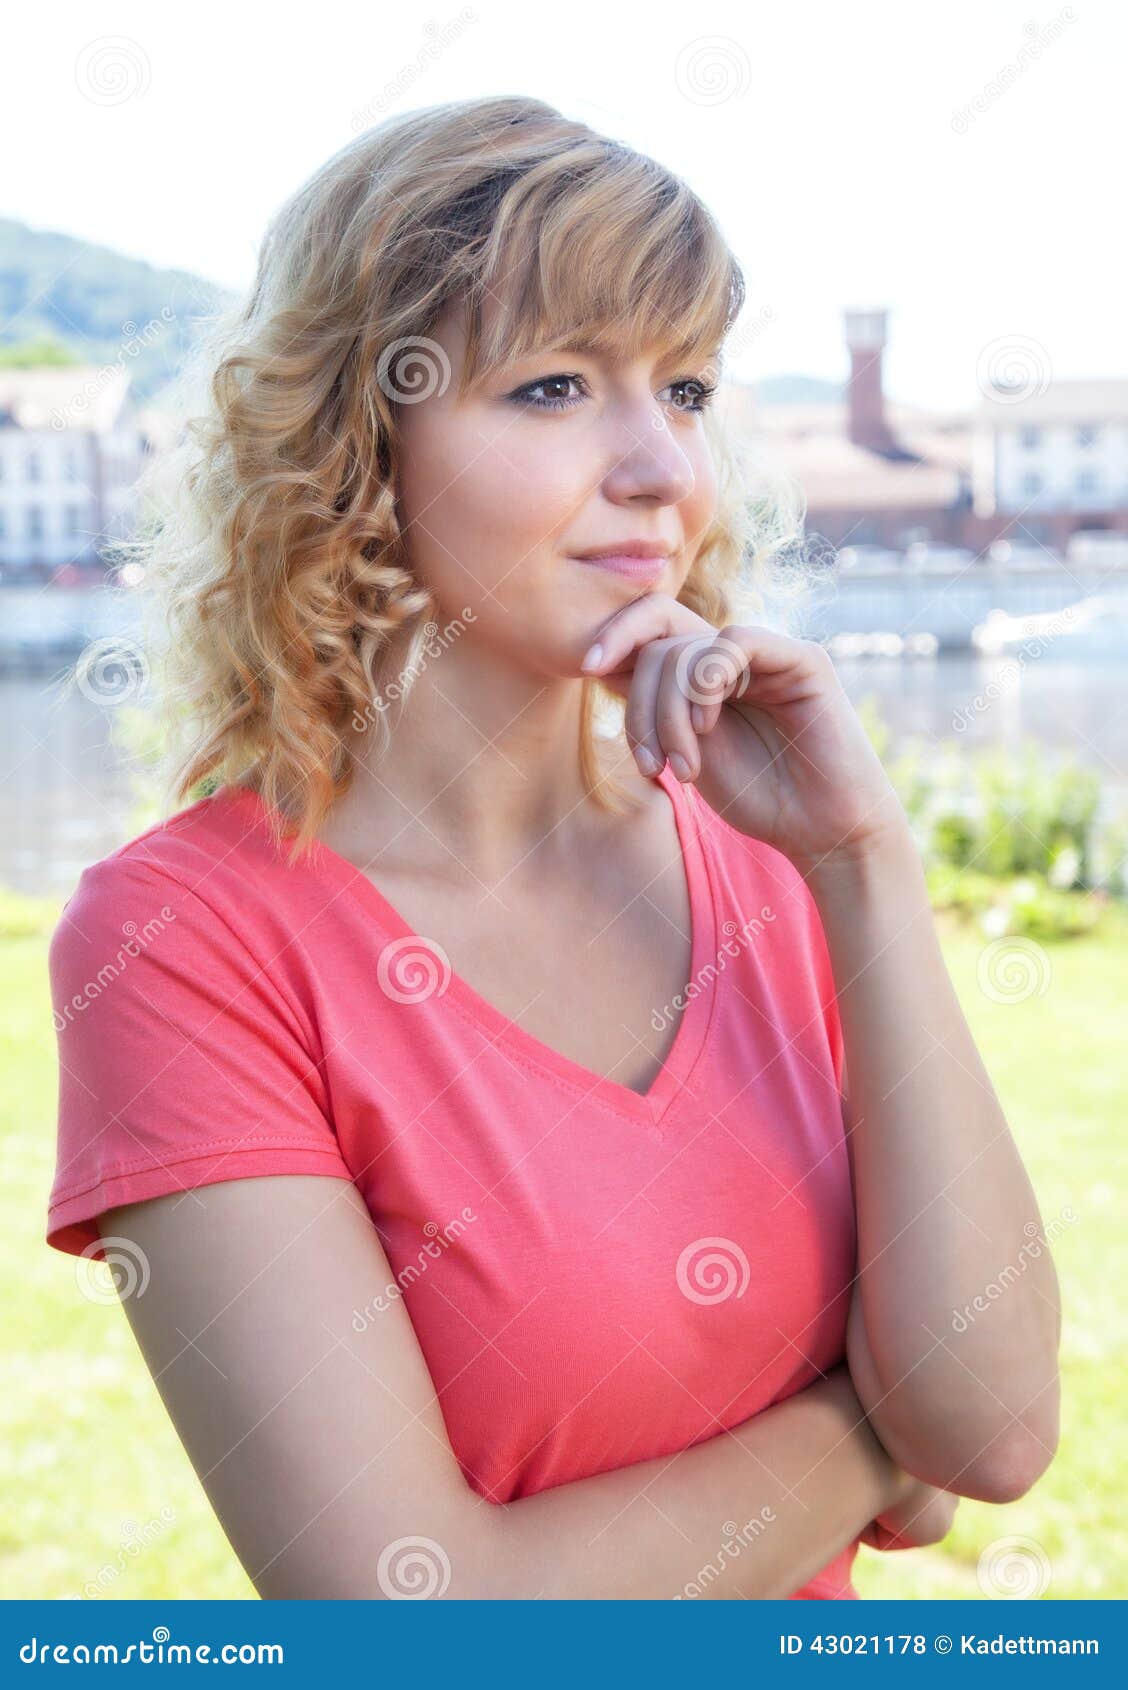 Thoughtful Woman in a Pink Shirt Outside Stock Photo - Image of ...